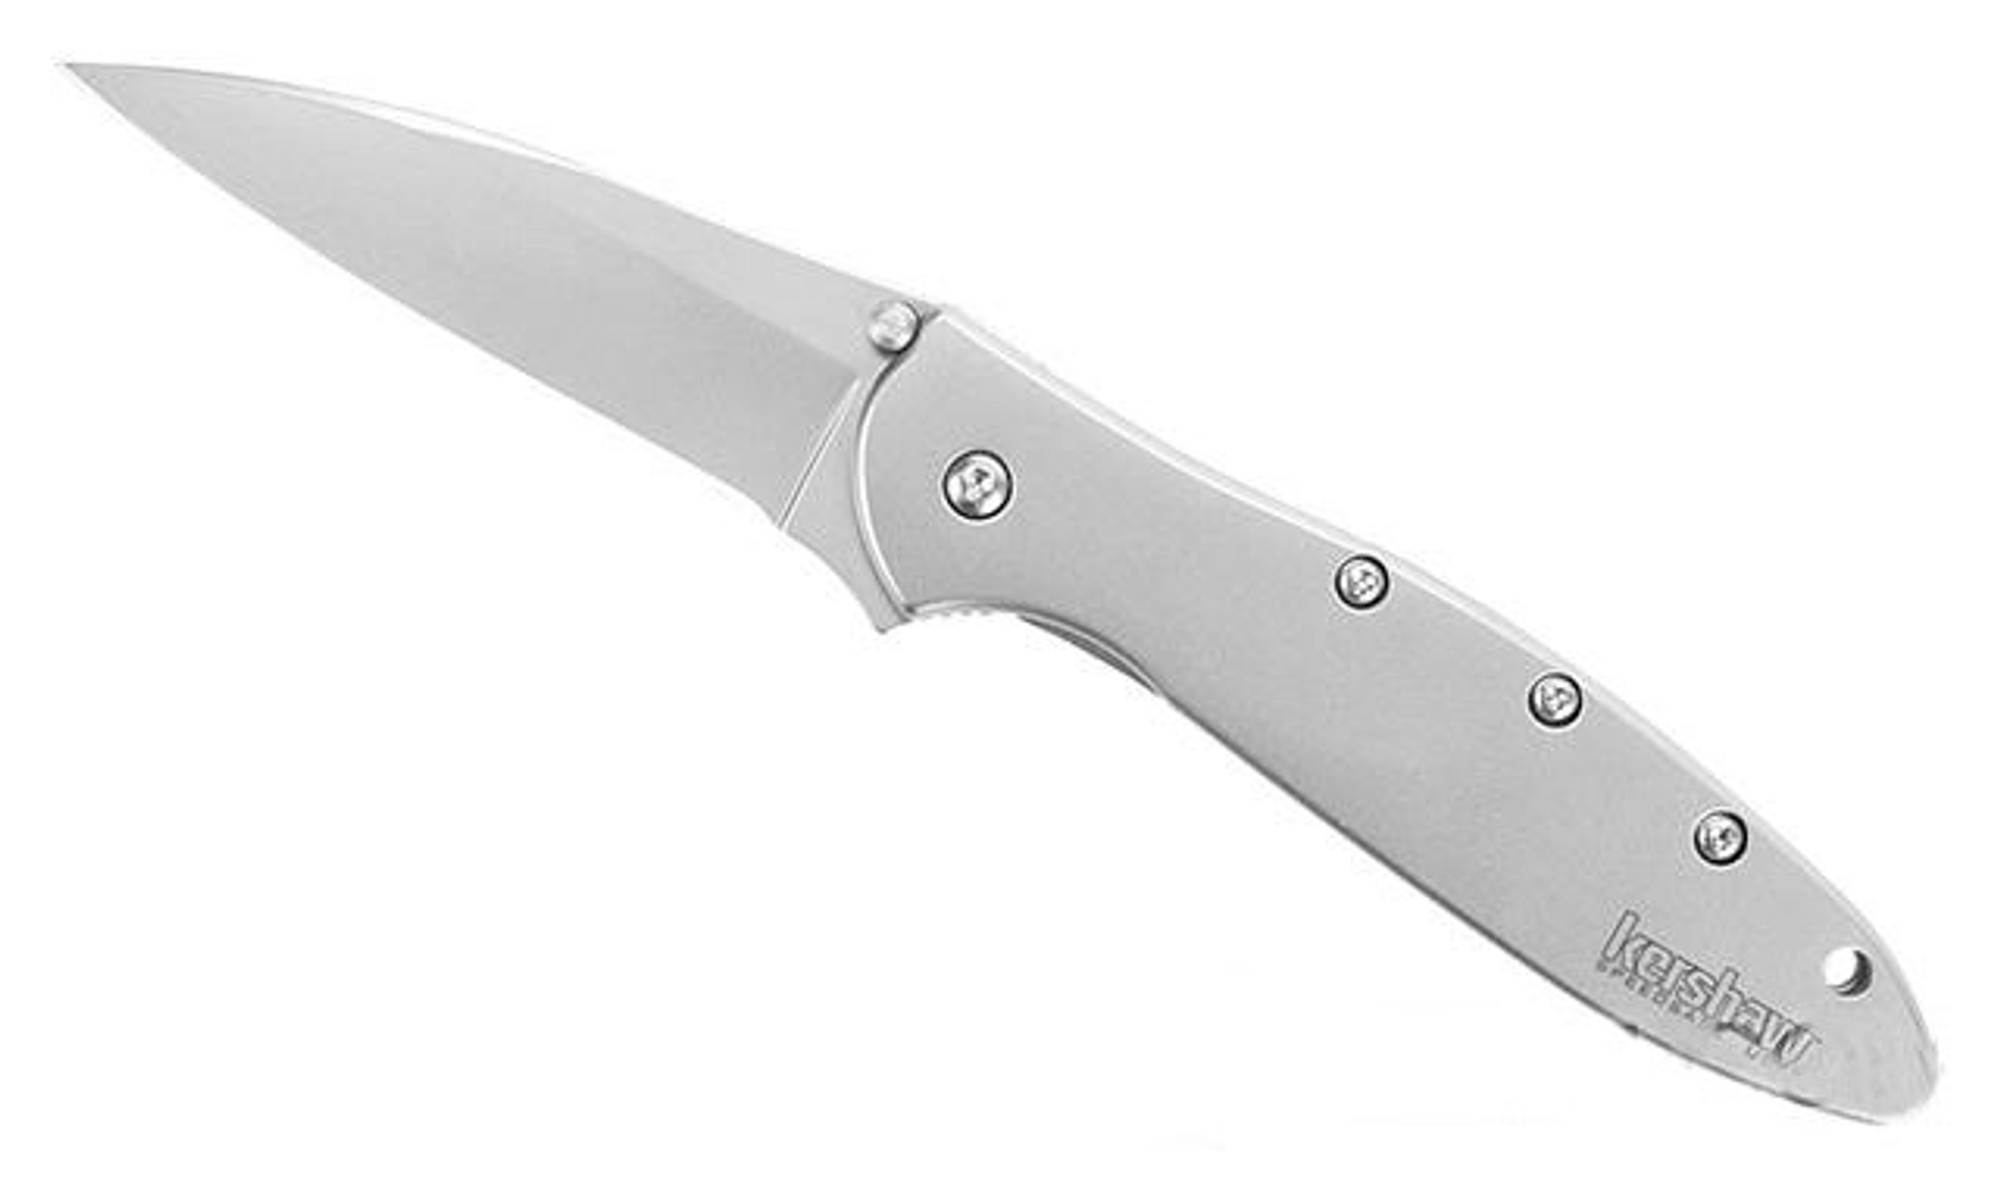 Kershaw Leek Spring Assisted Folding Knife with 3" Blade - Stainless Steel